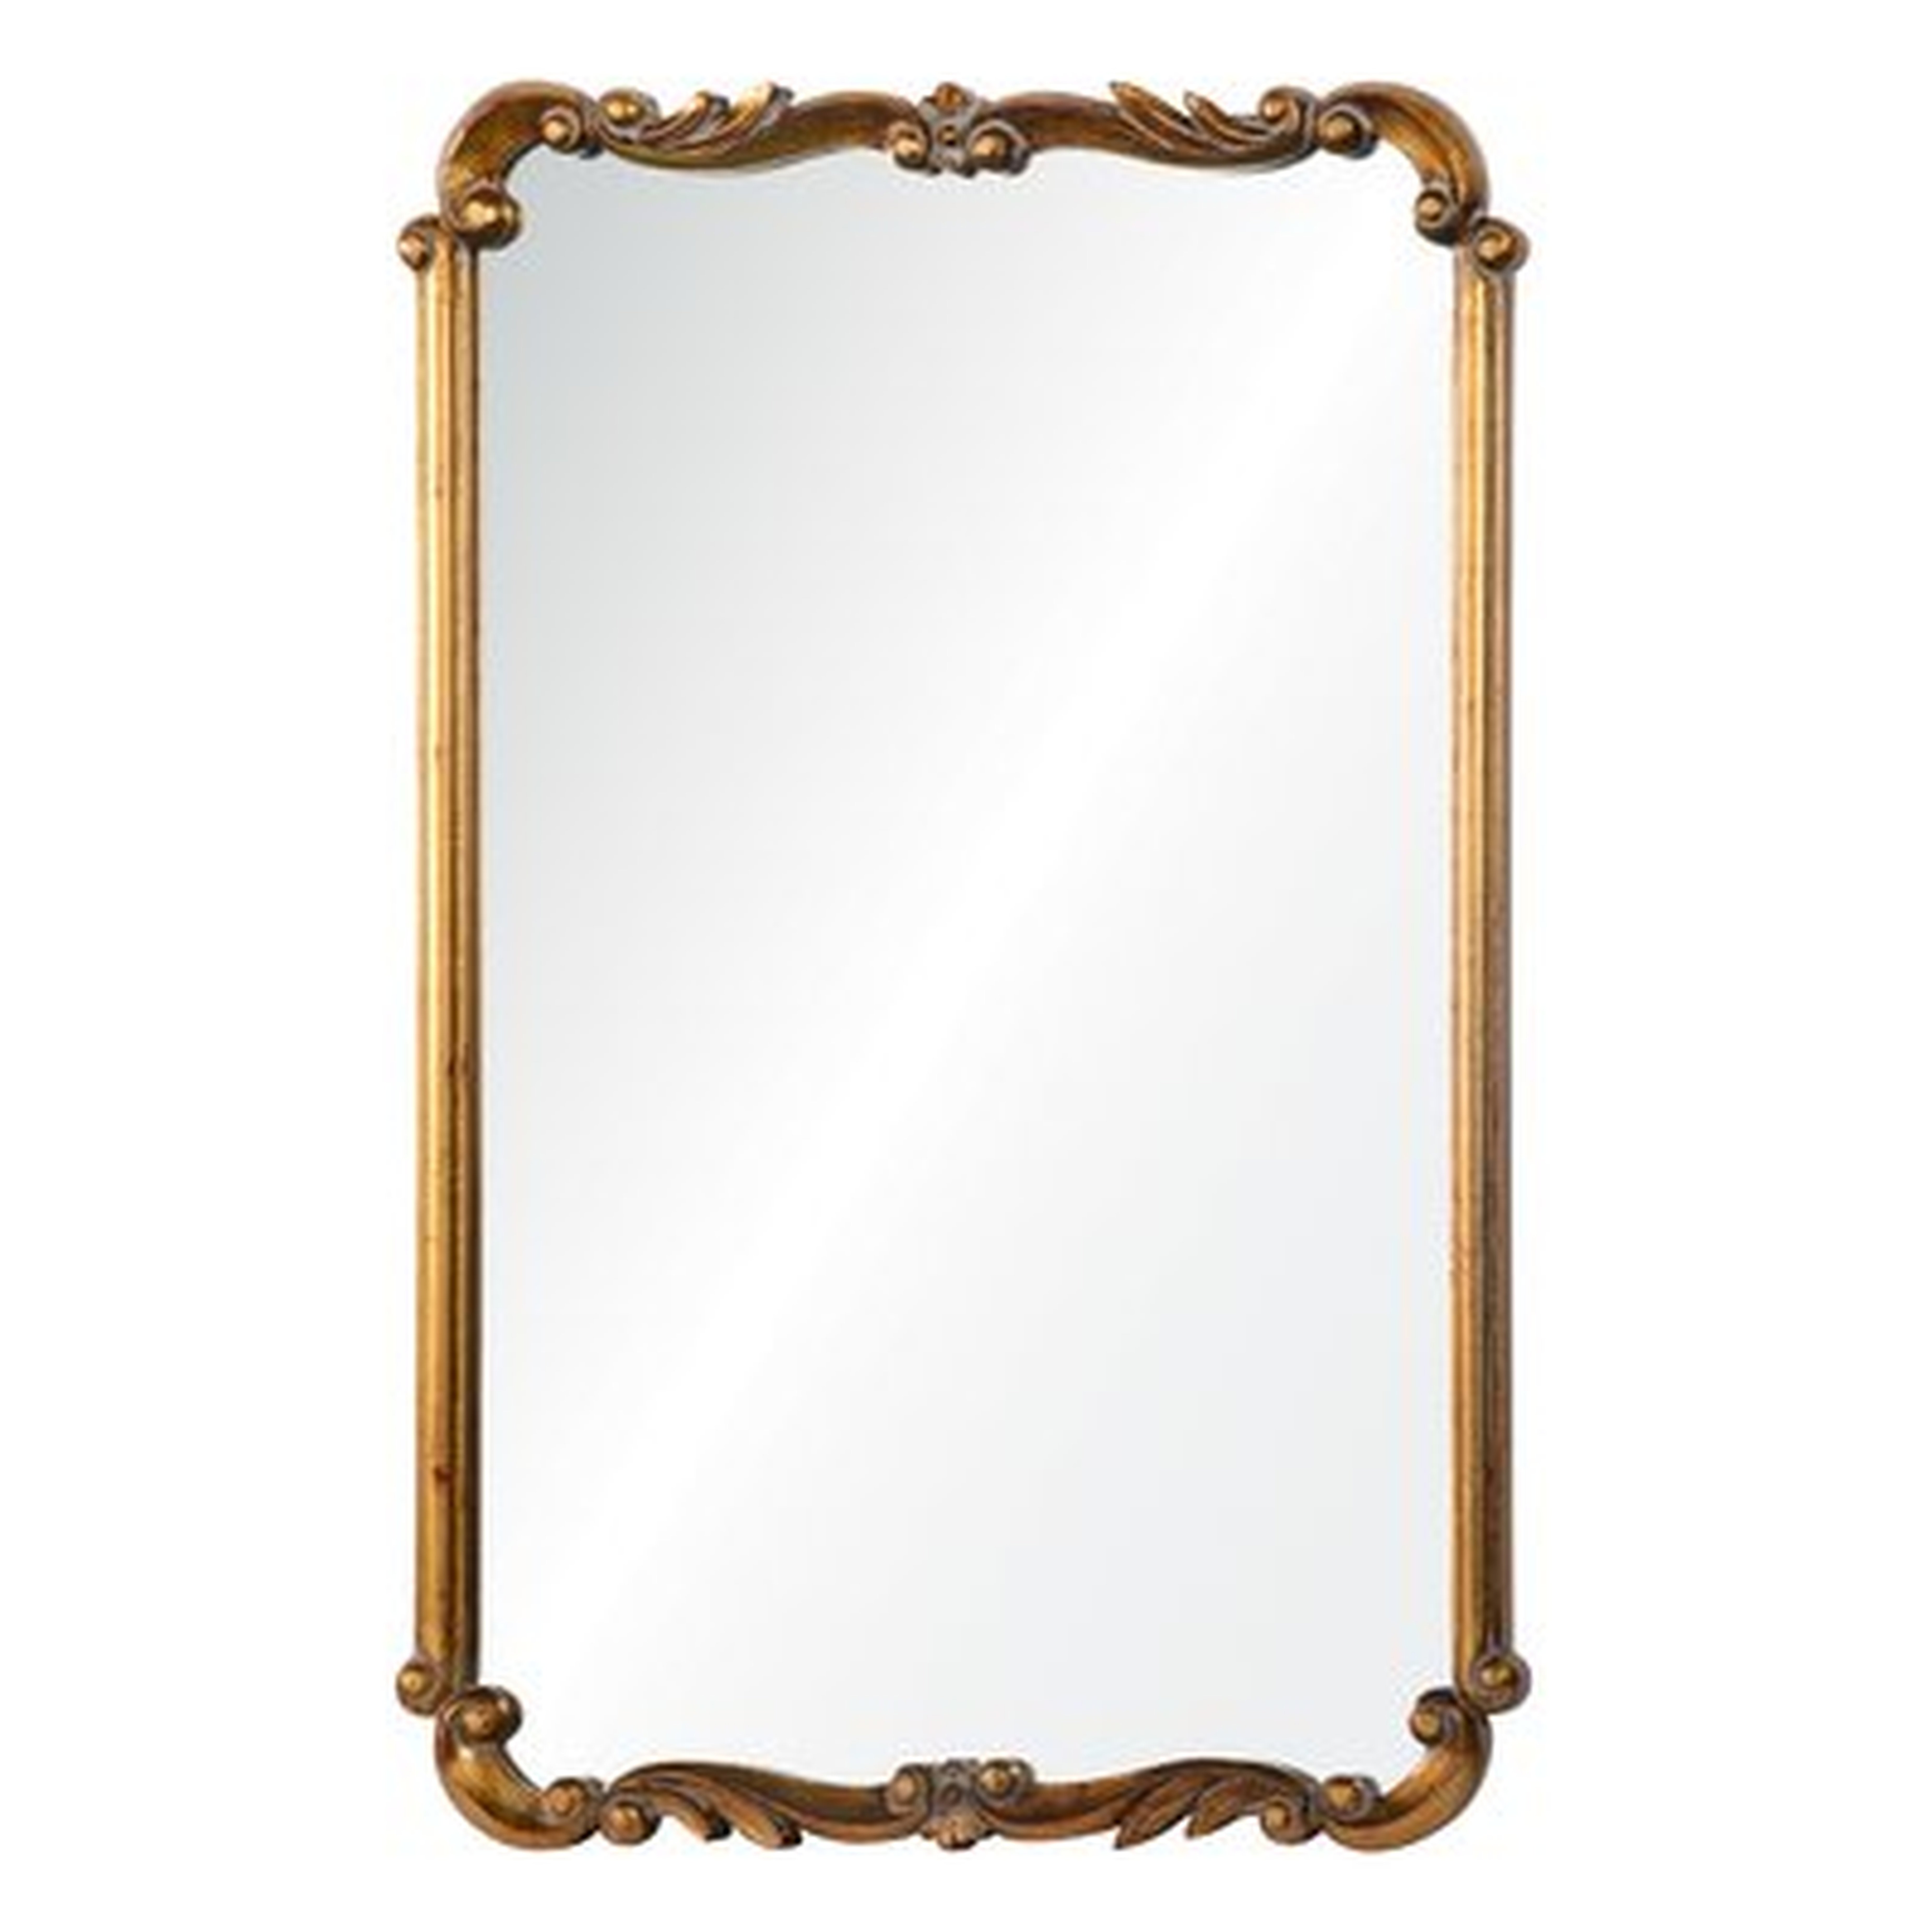 TOULOUSE BOLD & ECLECTIC MODERN WALL MIRROR - Perigold